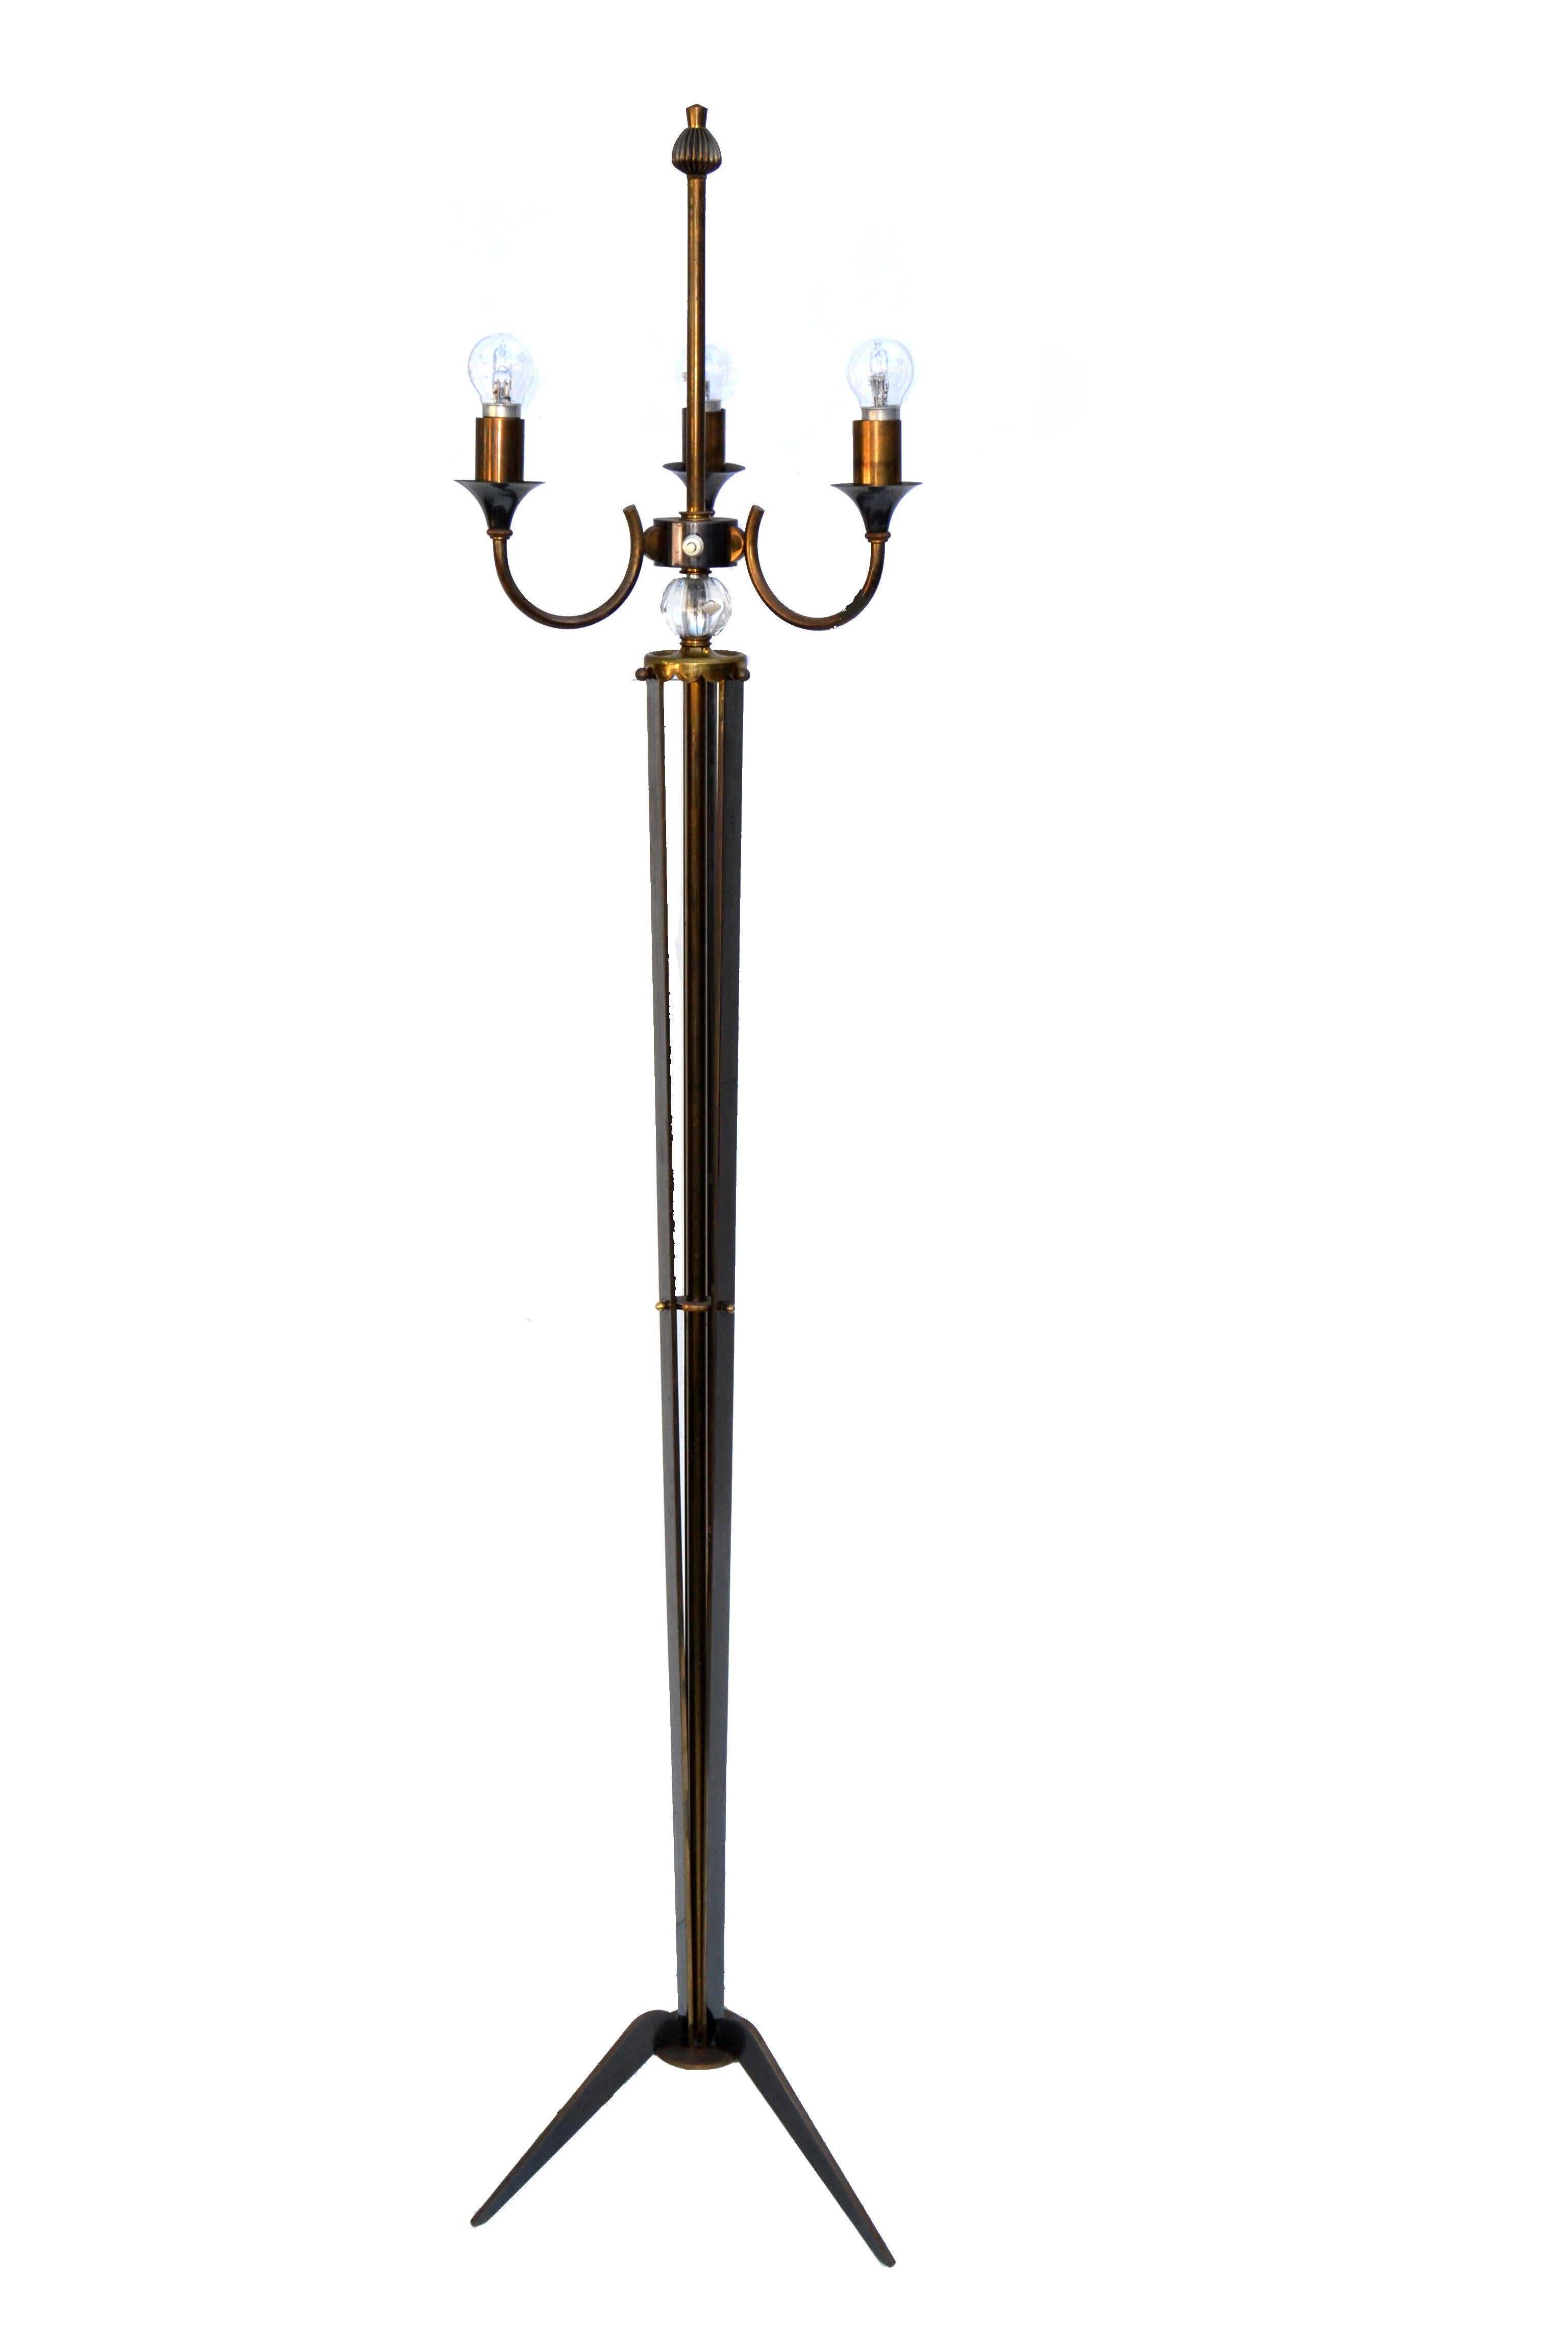 Pair of Neoclassical Maison Jansen style floor lamp in two patina, brass & gun metal finish with crystal cups at the 3-arm light top, mounted on a tripod base.
Has an on/off switch at the Top.
Takes 3 light bulbs with max. 40 watts each.
Shade